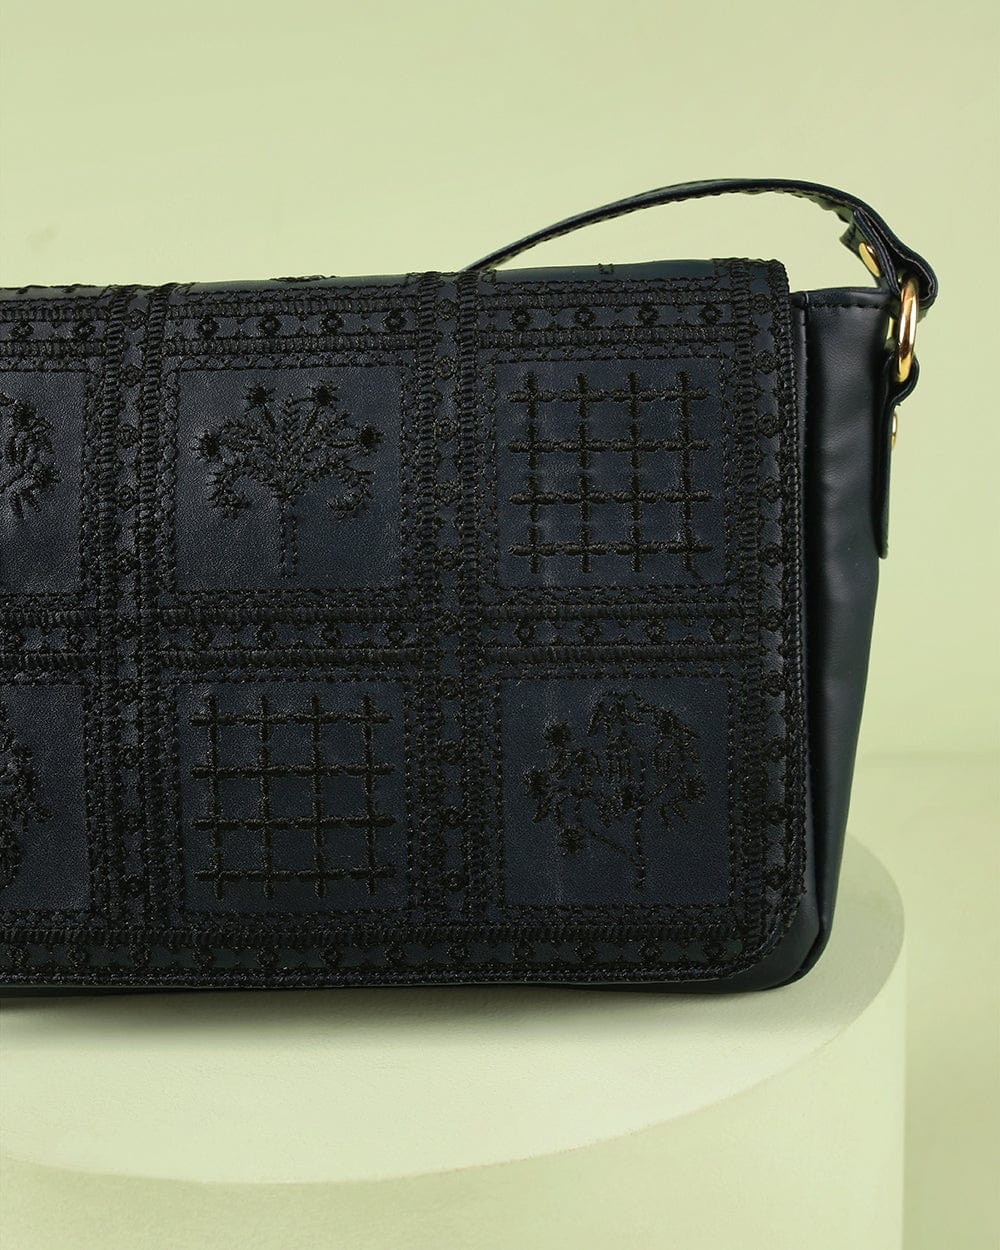 Chumbak Rustic Embroidered Sling Bag - Navy